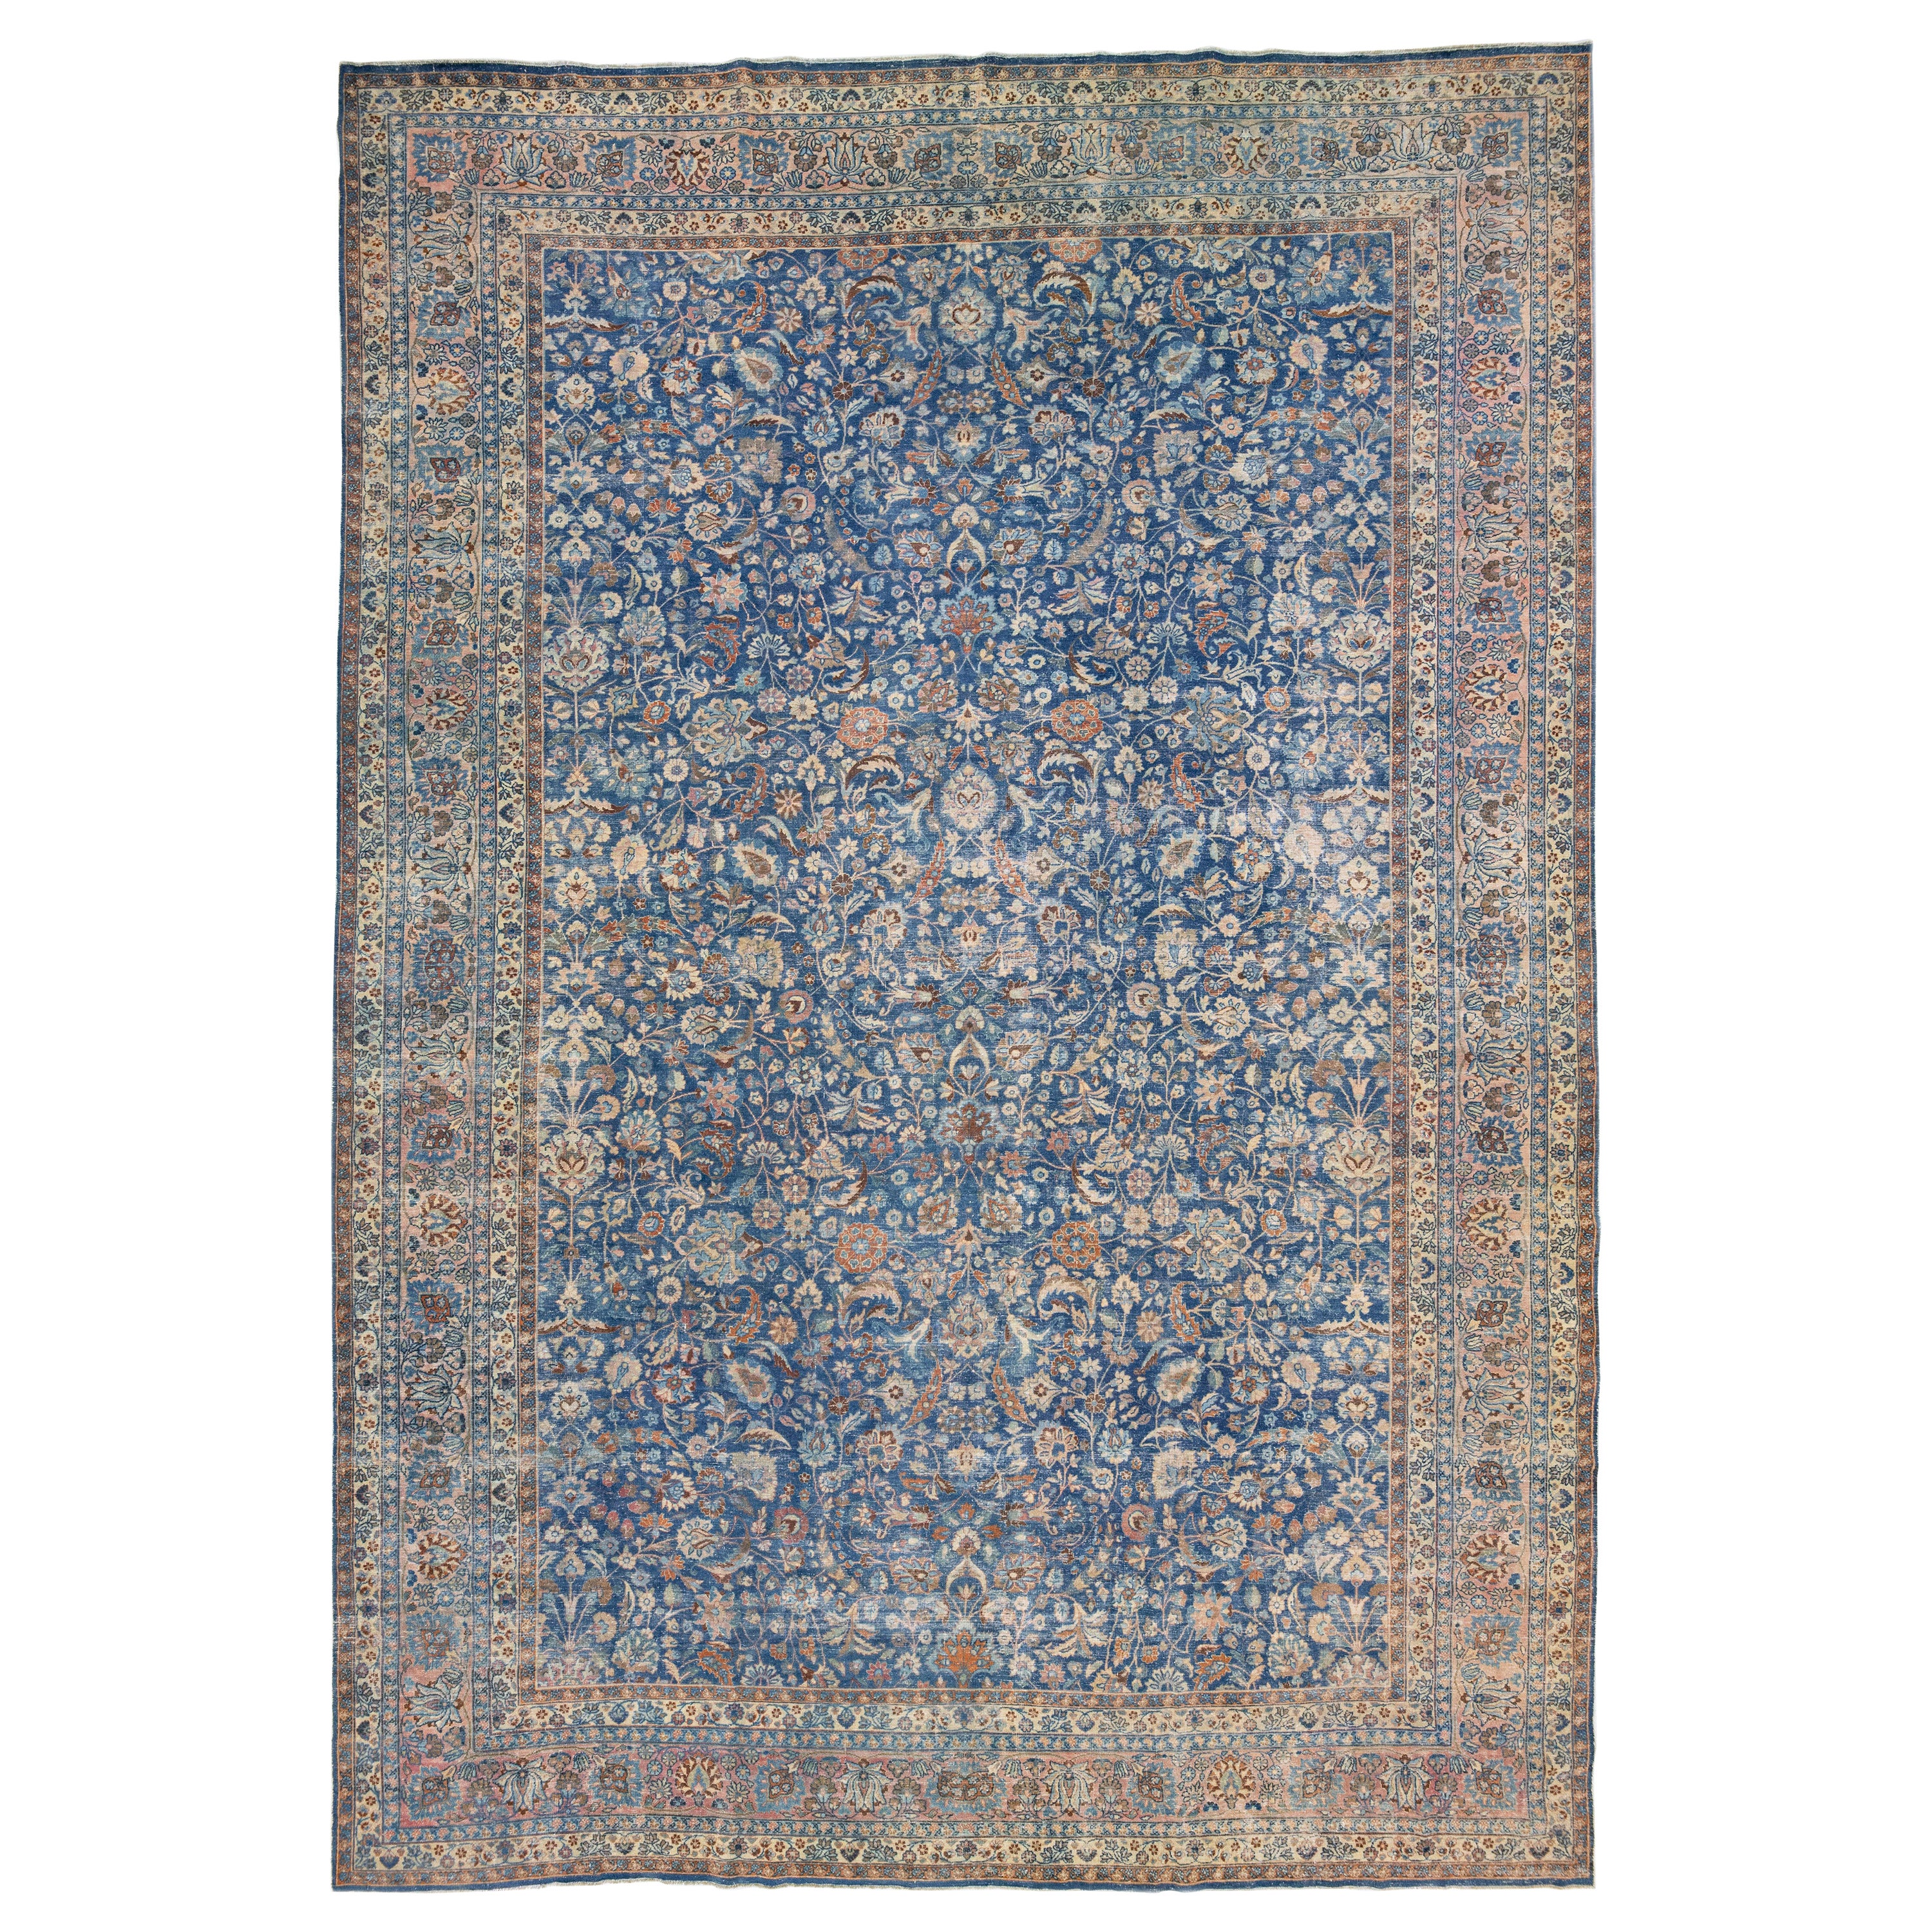 Oversize Handmade Floral Persian Mashad Wool Rug in Blue For Sale